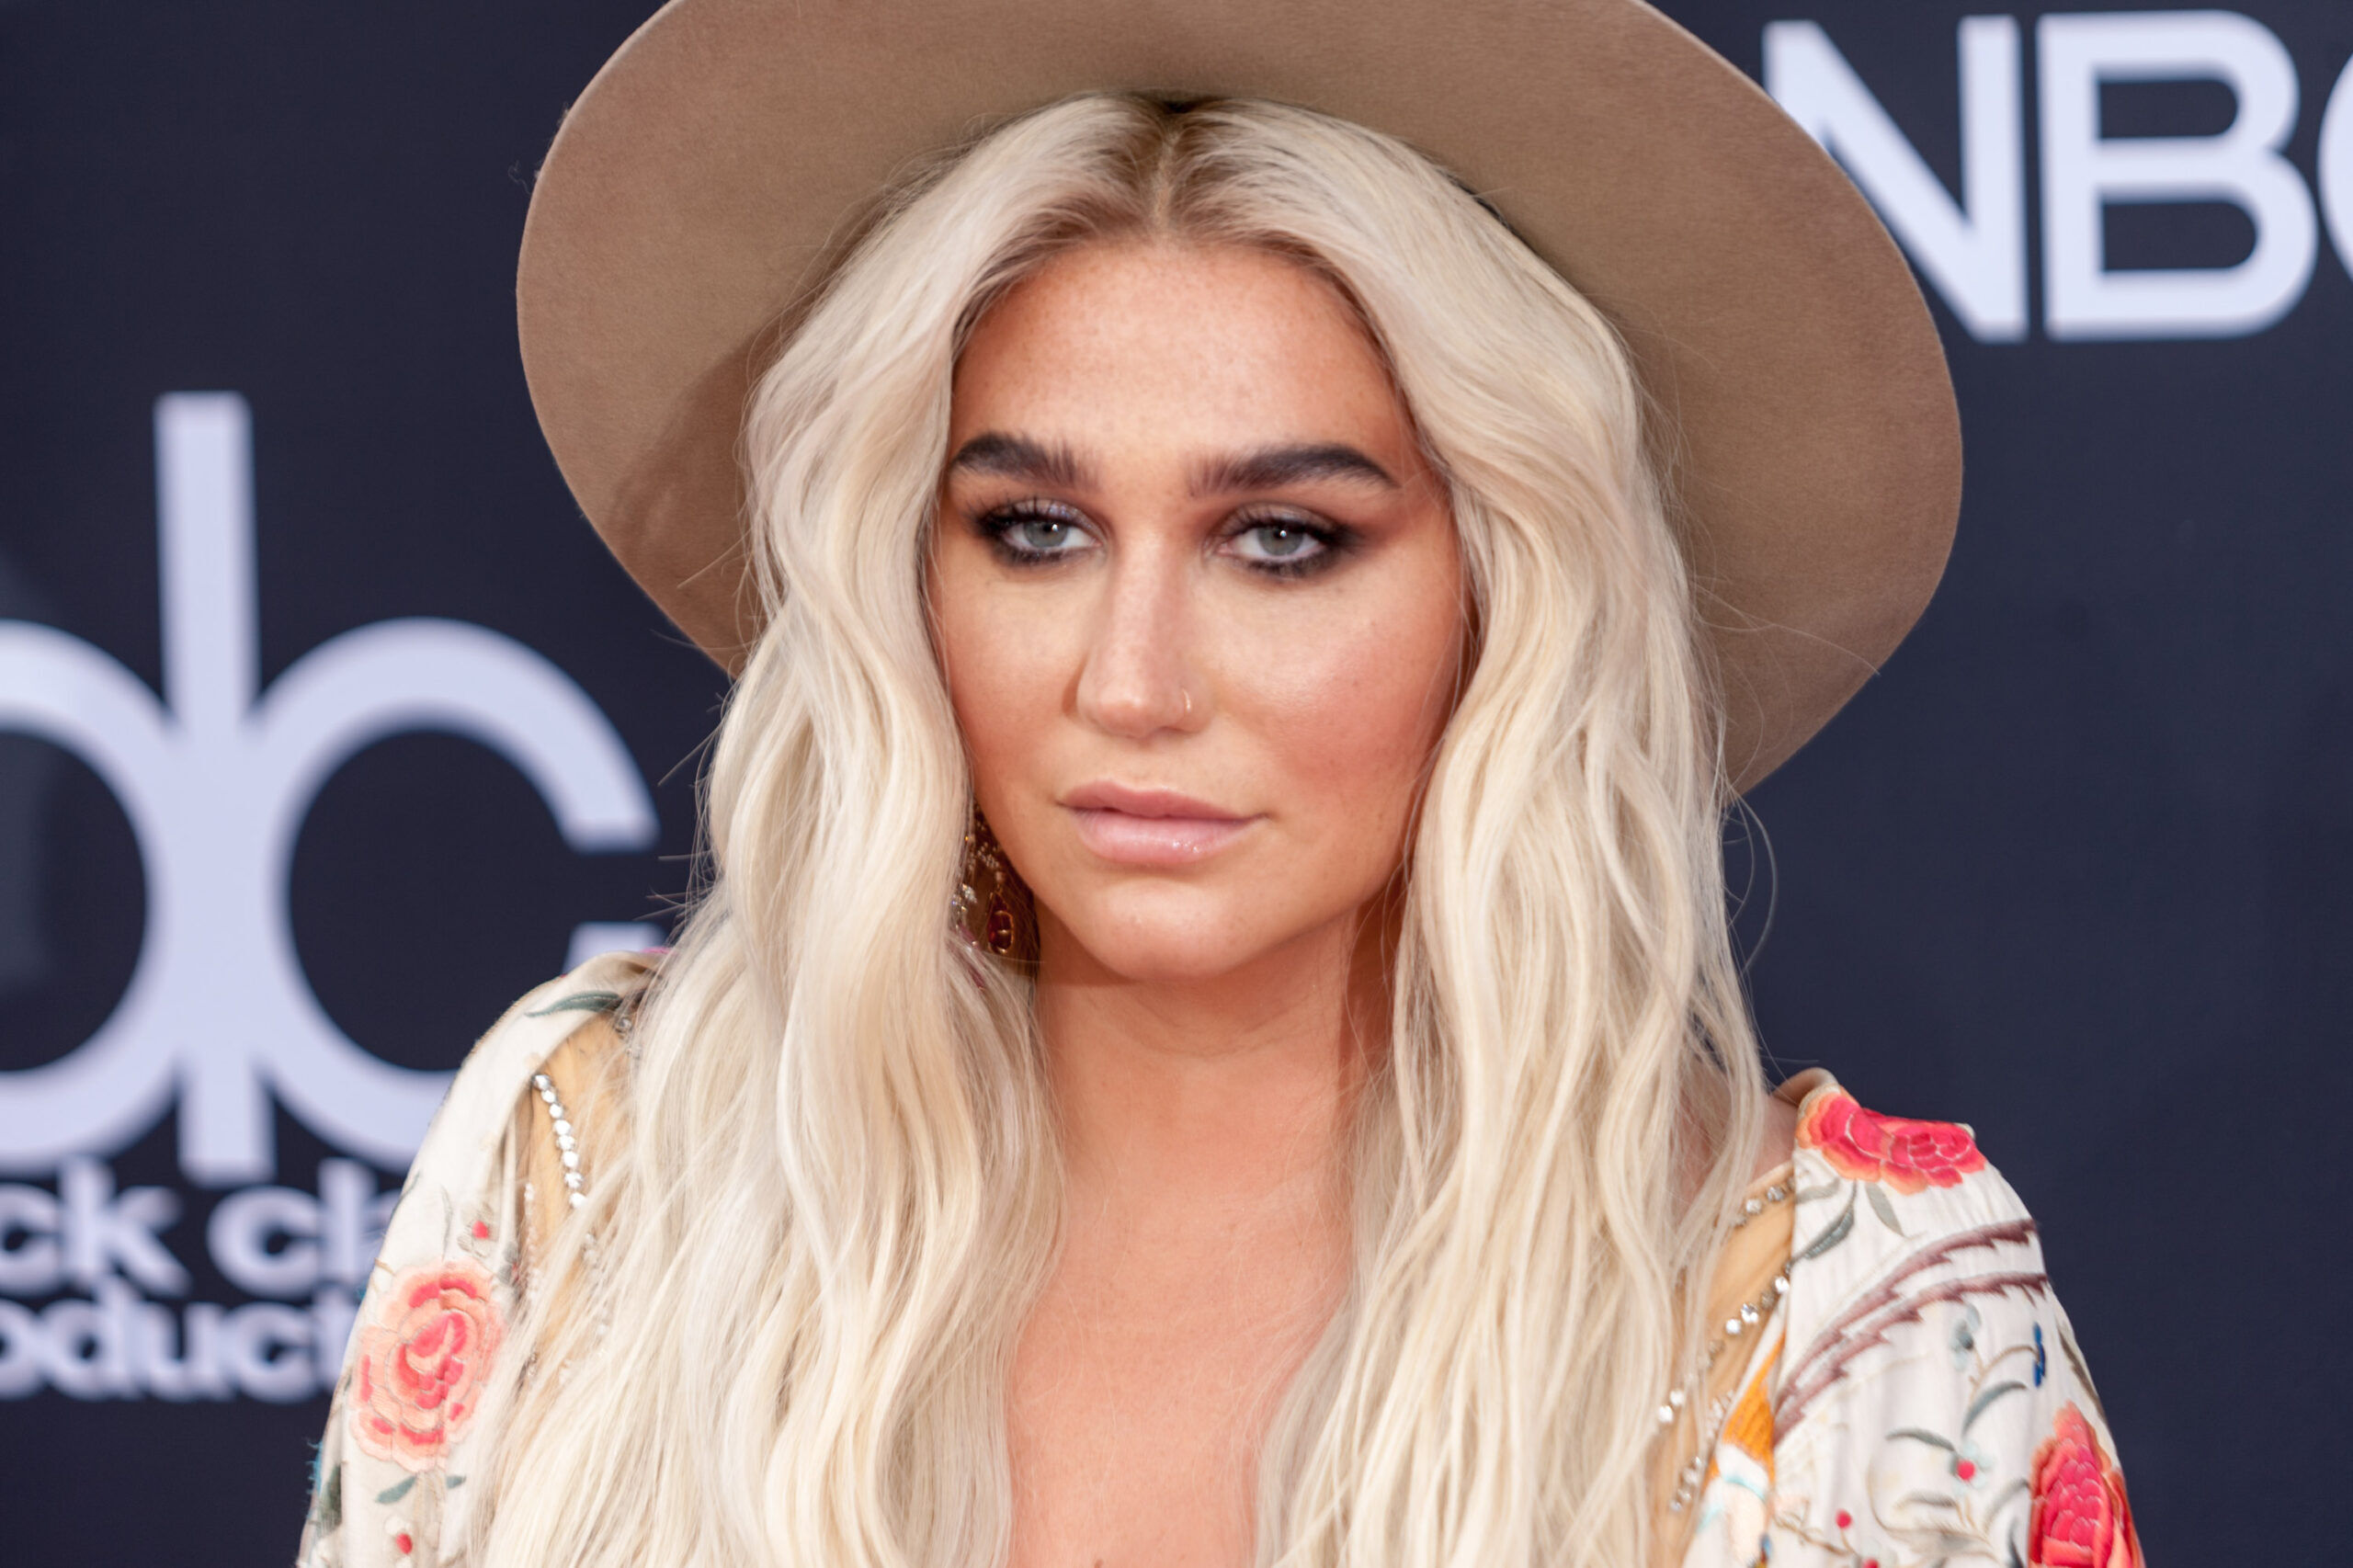 #FreeKesha trends on Twitter as Kim Petras defended her collaborations with Dr. Luke